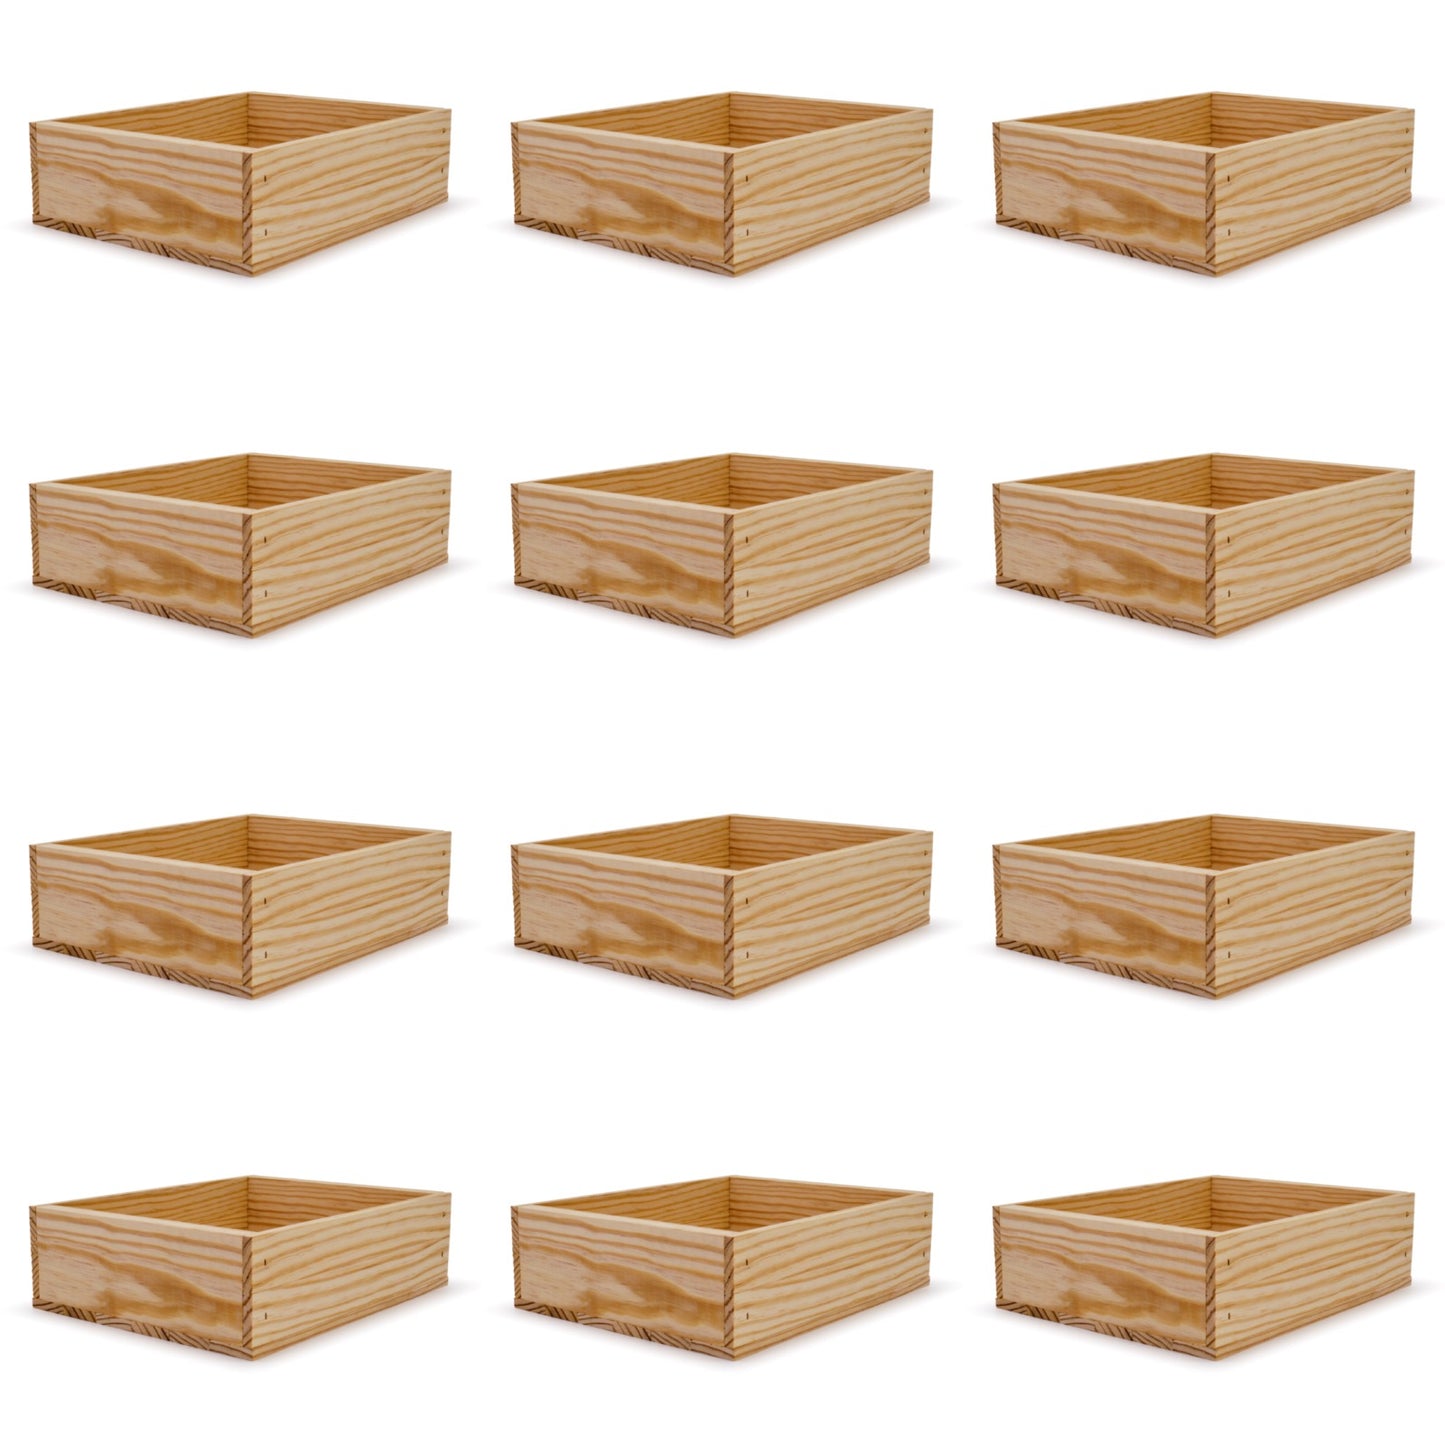 12 Small wooden crates 12x9.75x3.5